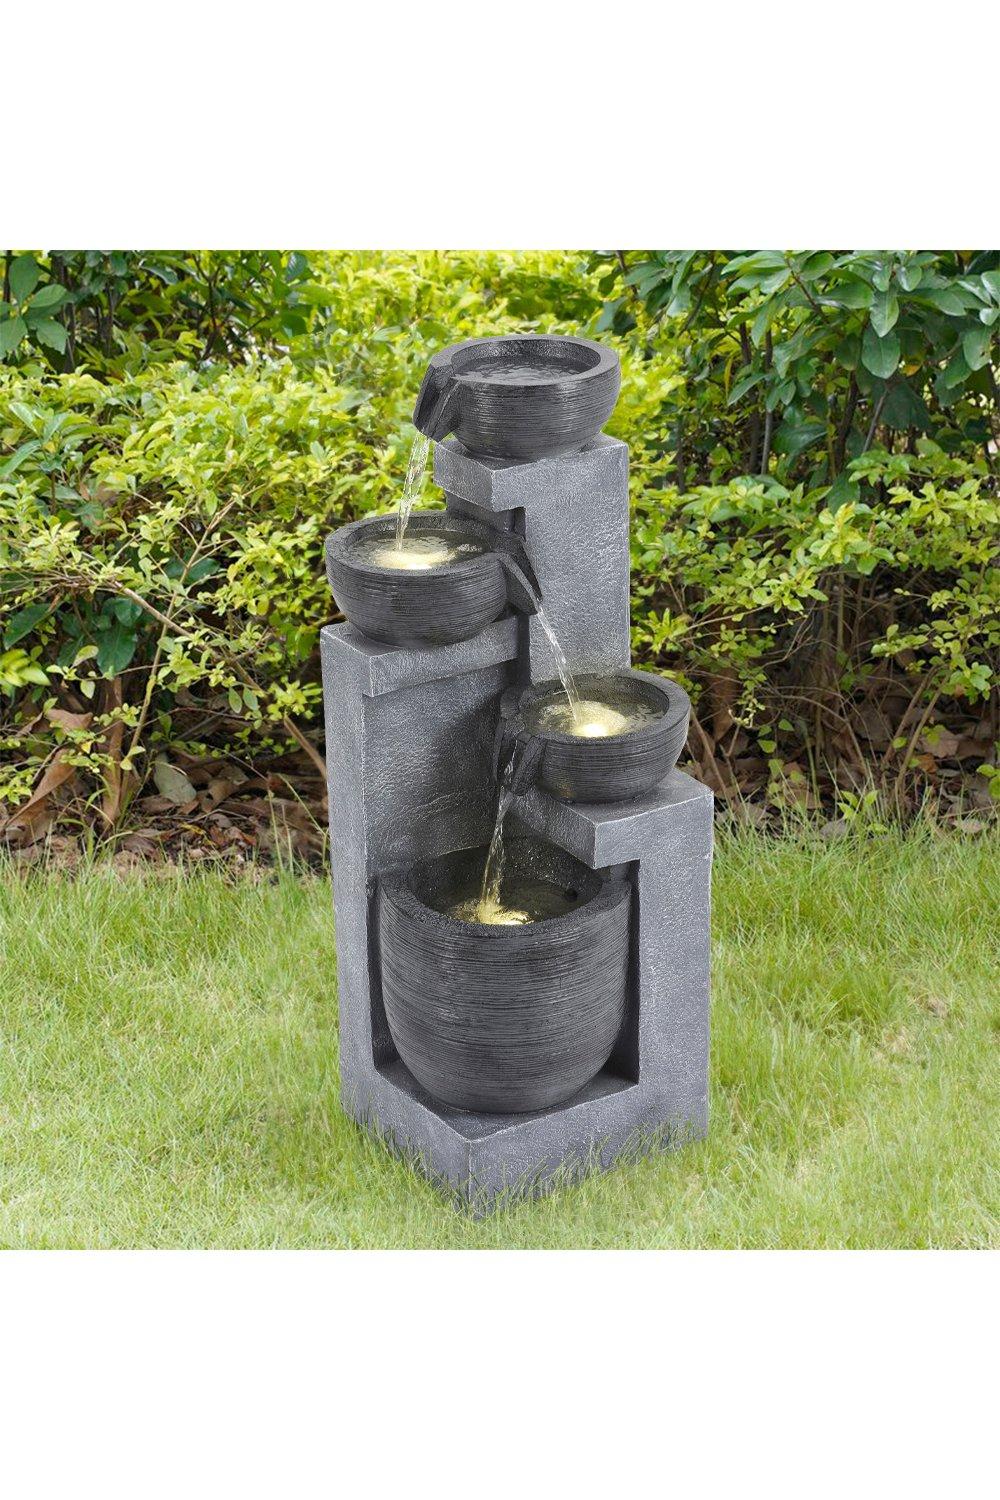 Garden Water Fountain Decor with Lights